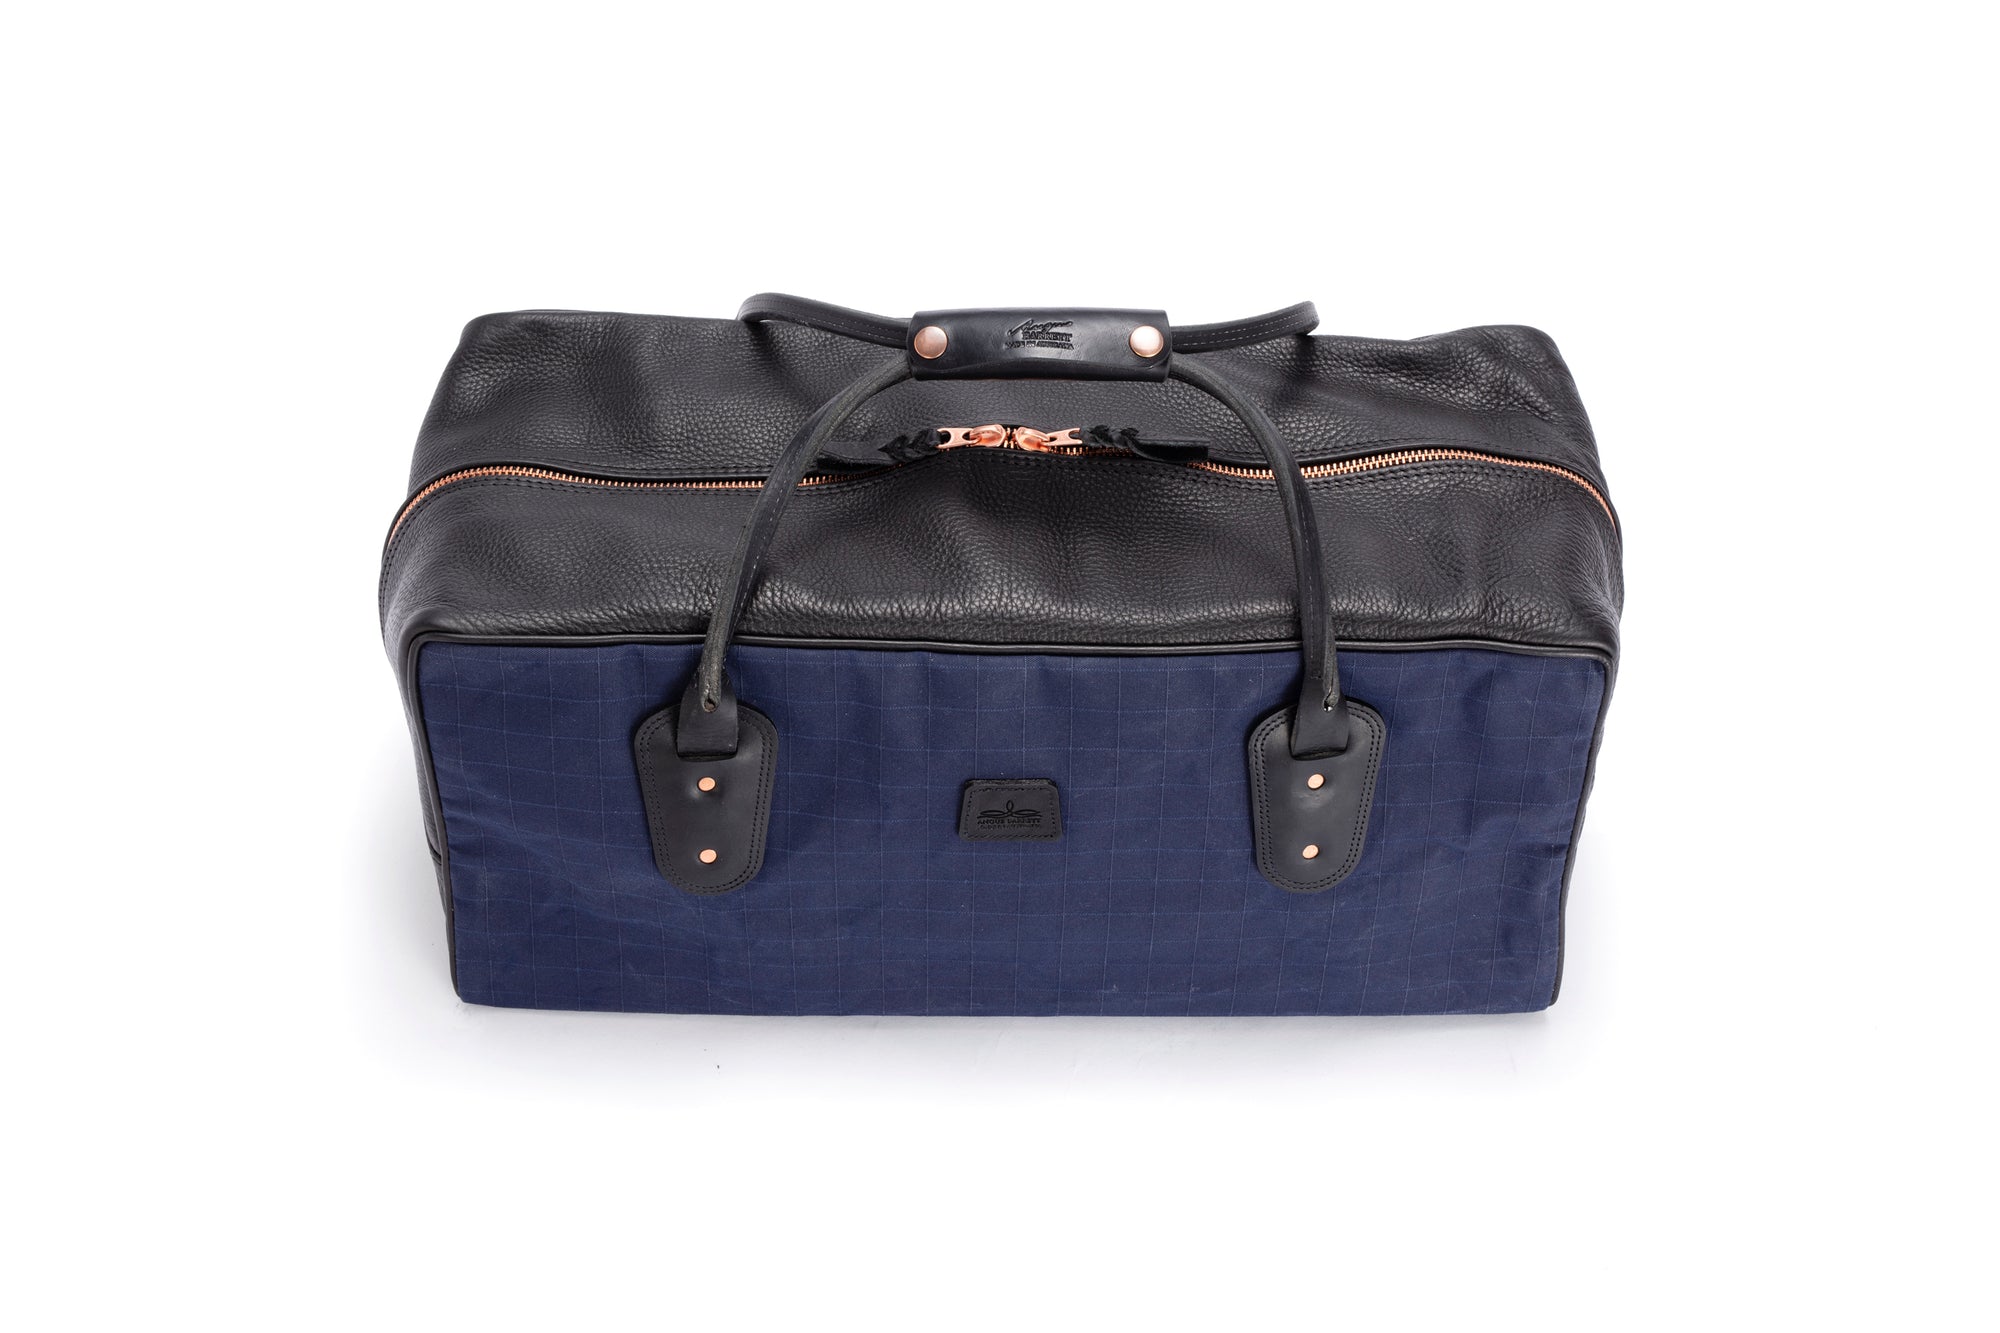 Weekender Travel Bag - Navy Canvas with Black Leather Trim